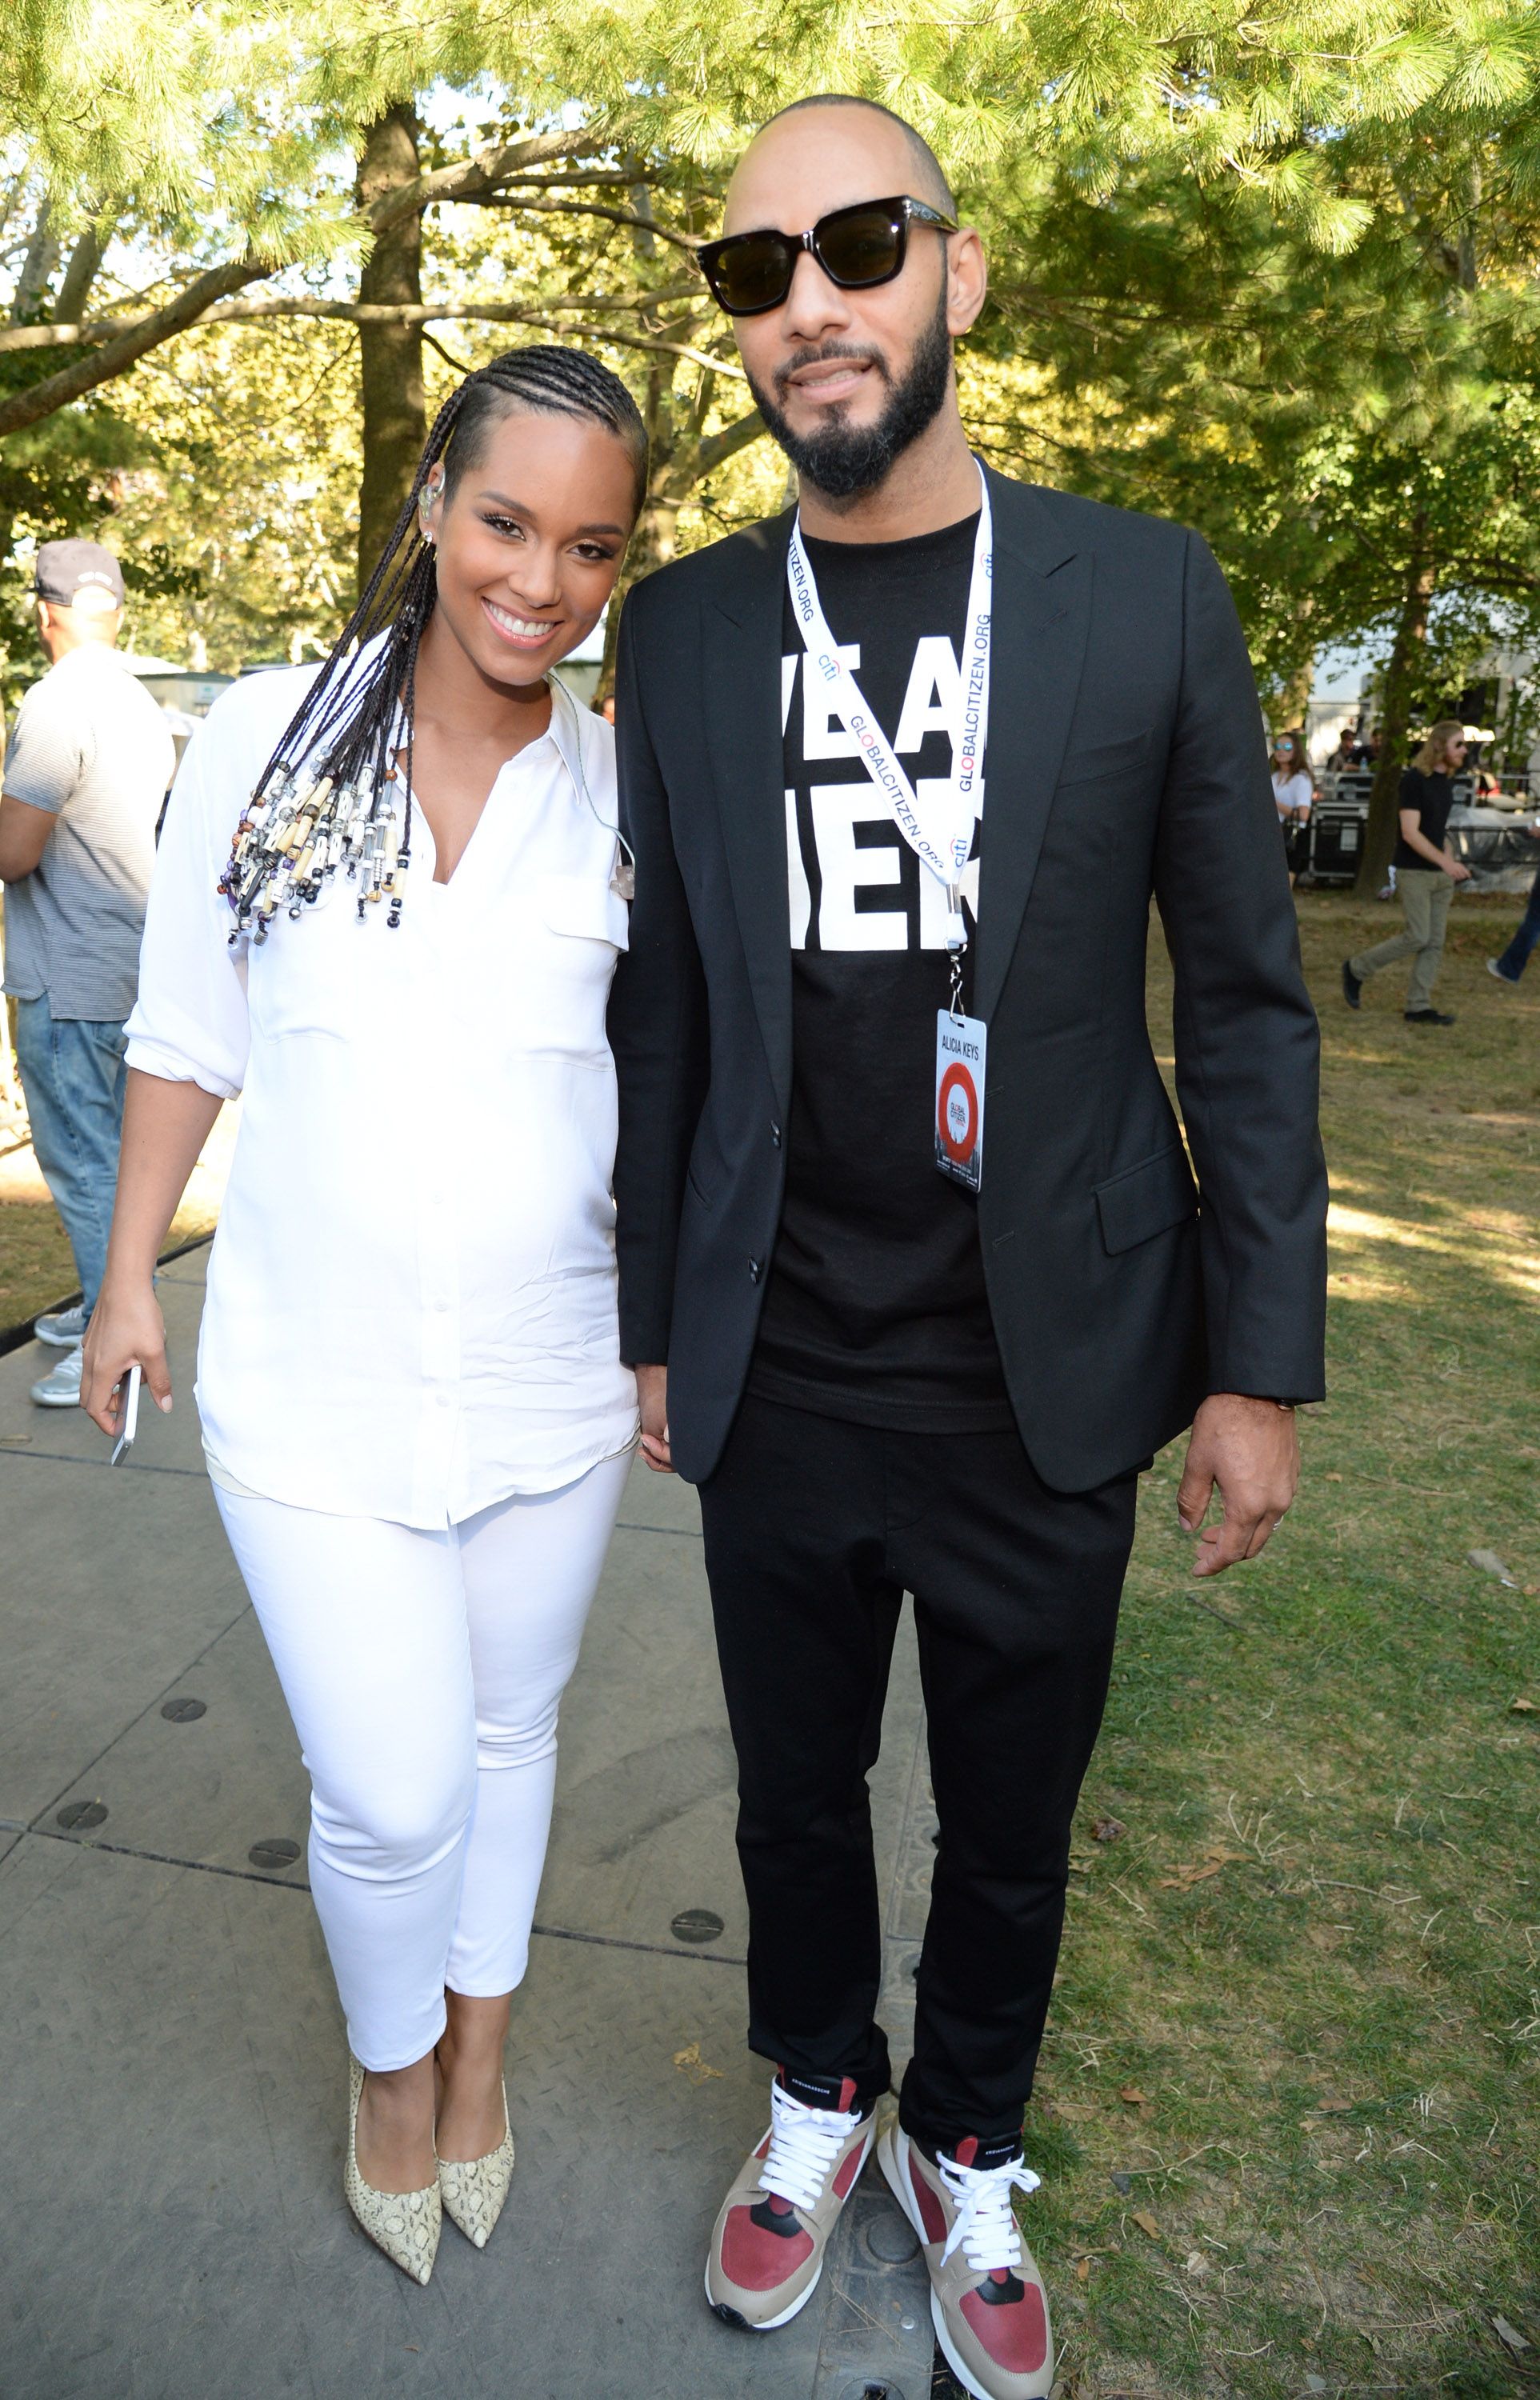 Alicia Keys and Swizz Beatz during the 2014 Global Citizen Festival at Central Park on September 27, 2014 in New York City. | Source: Getty Images